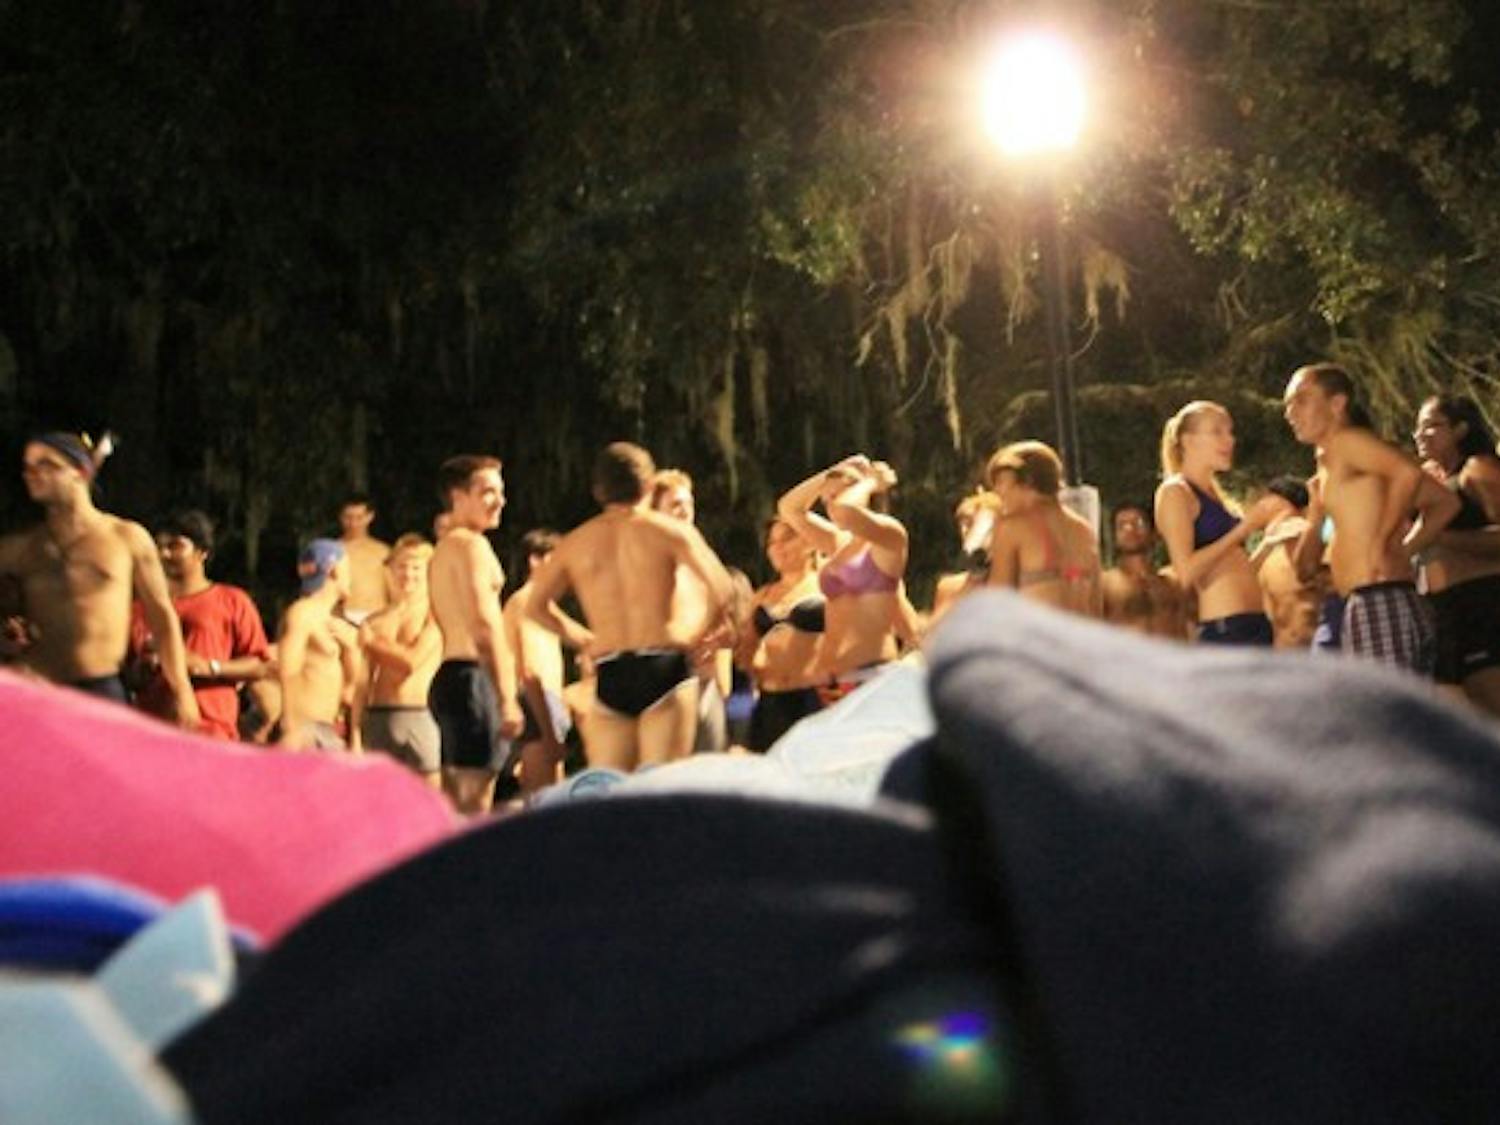 Participants in the Fall 2012 Underwear Dash strip off their clothes, which will be donated to St. Francis House, a Gainesville homeless shelter and soup kitchen. About 24 trash bags of clothing were donated.